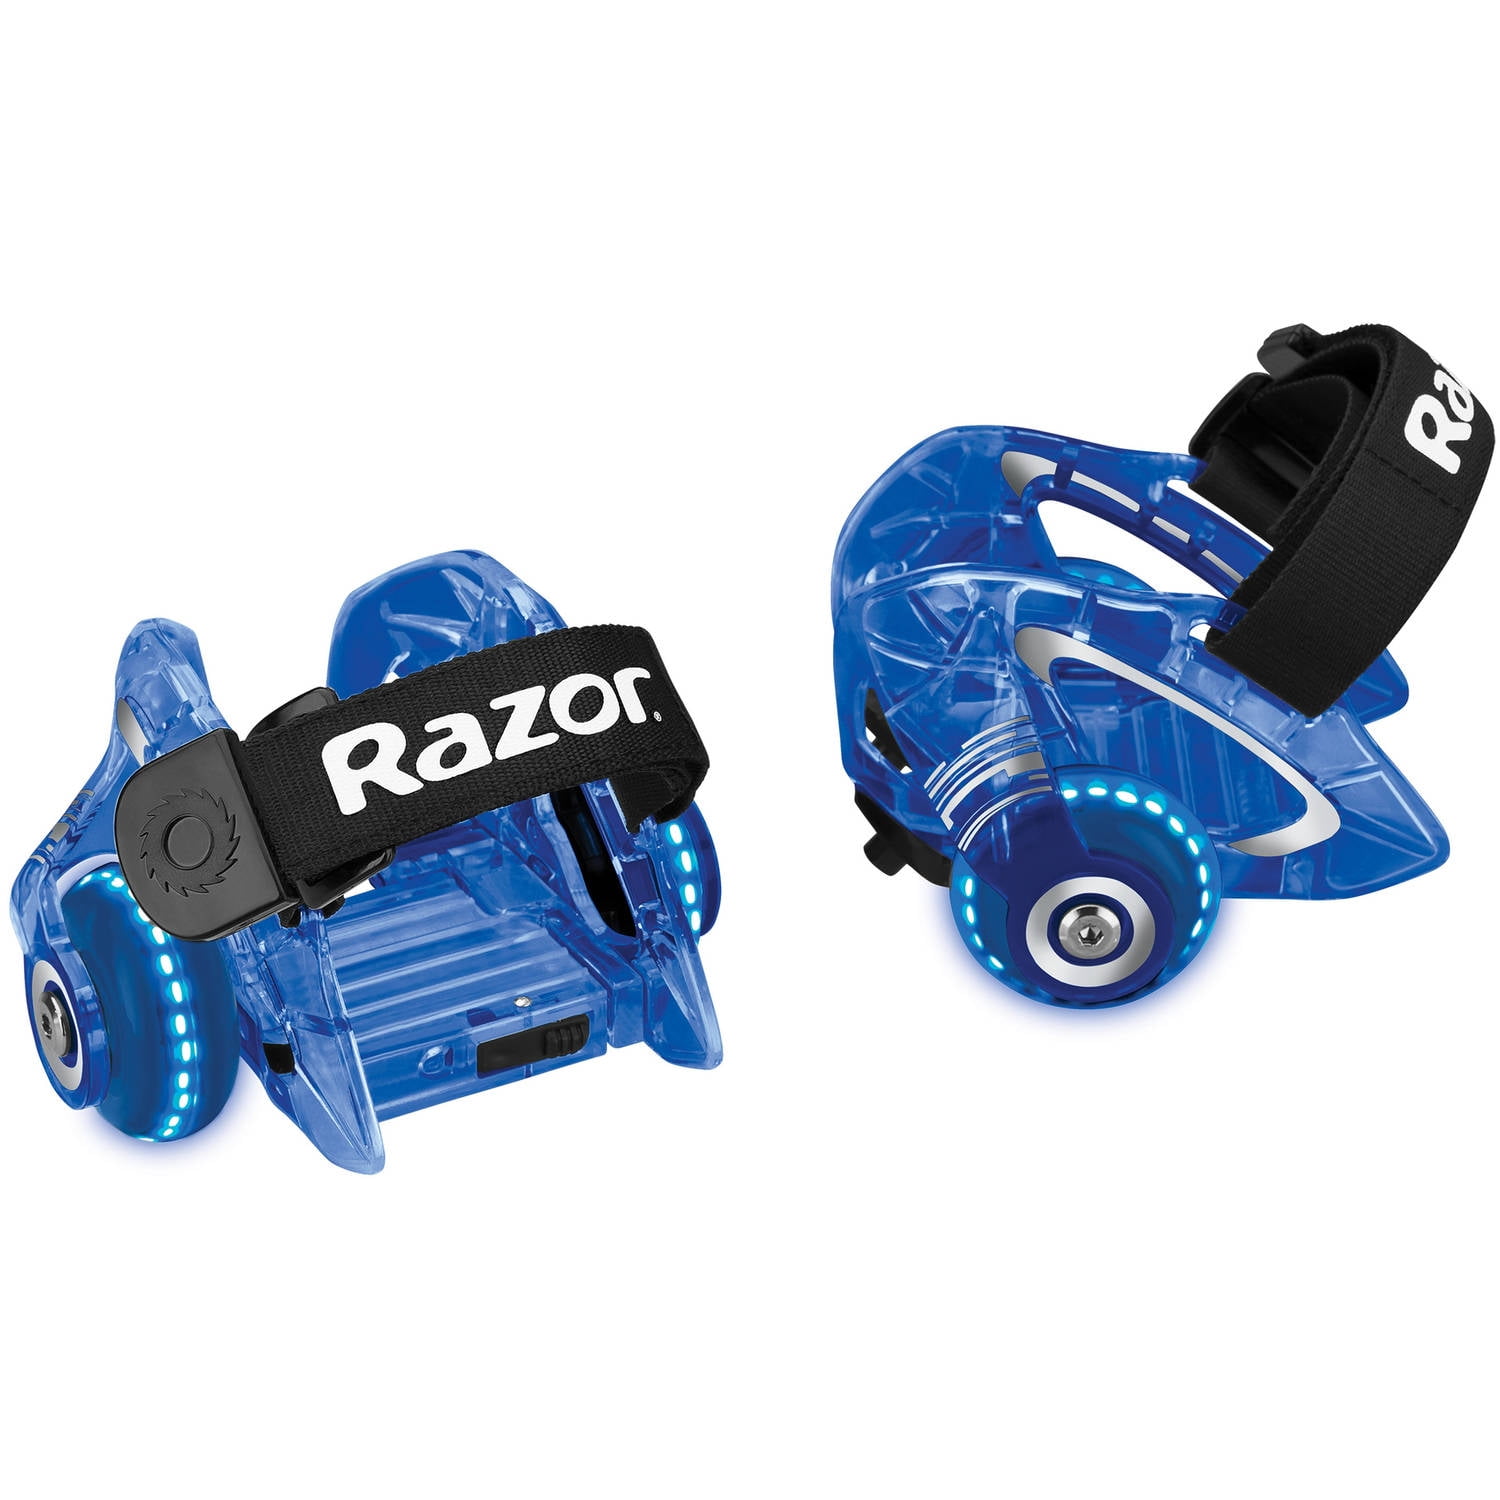 Razor Jetts DLX Heel Wheels with Sparks Neon Colors- Ages 9+ and Riders up to 176 lbs